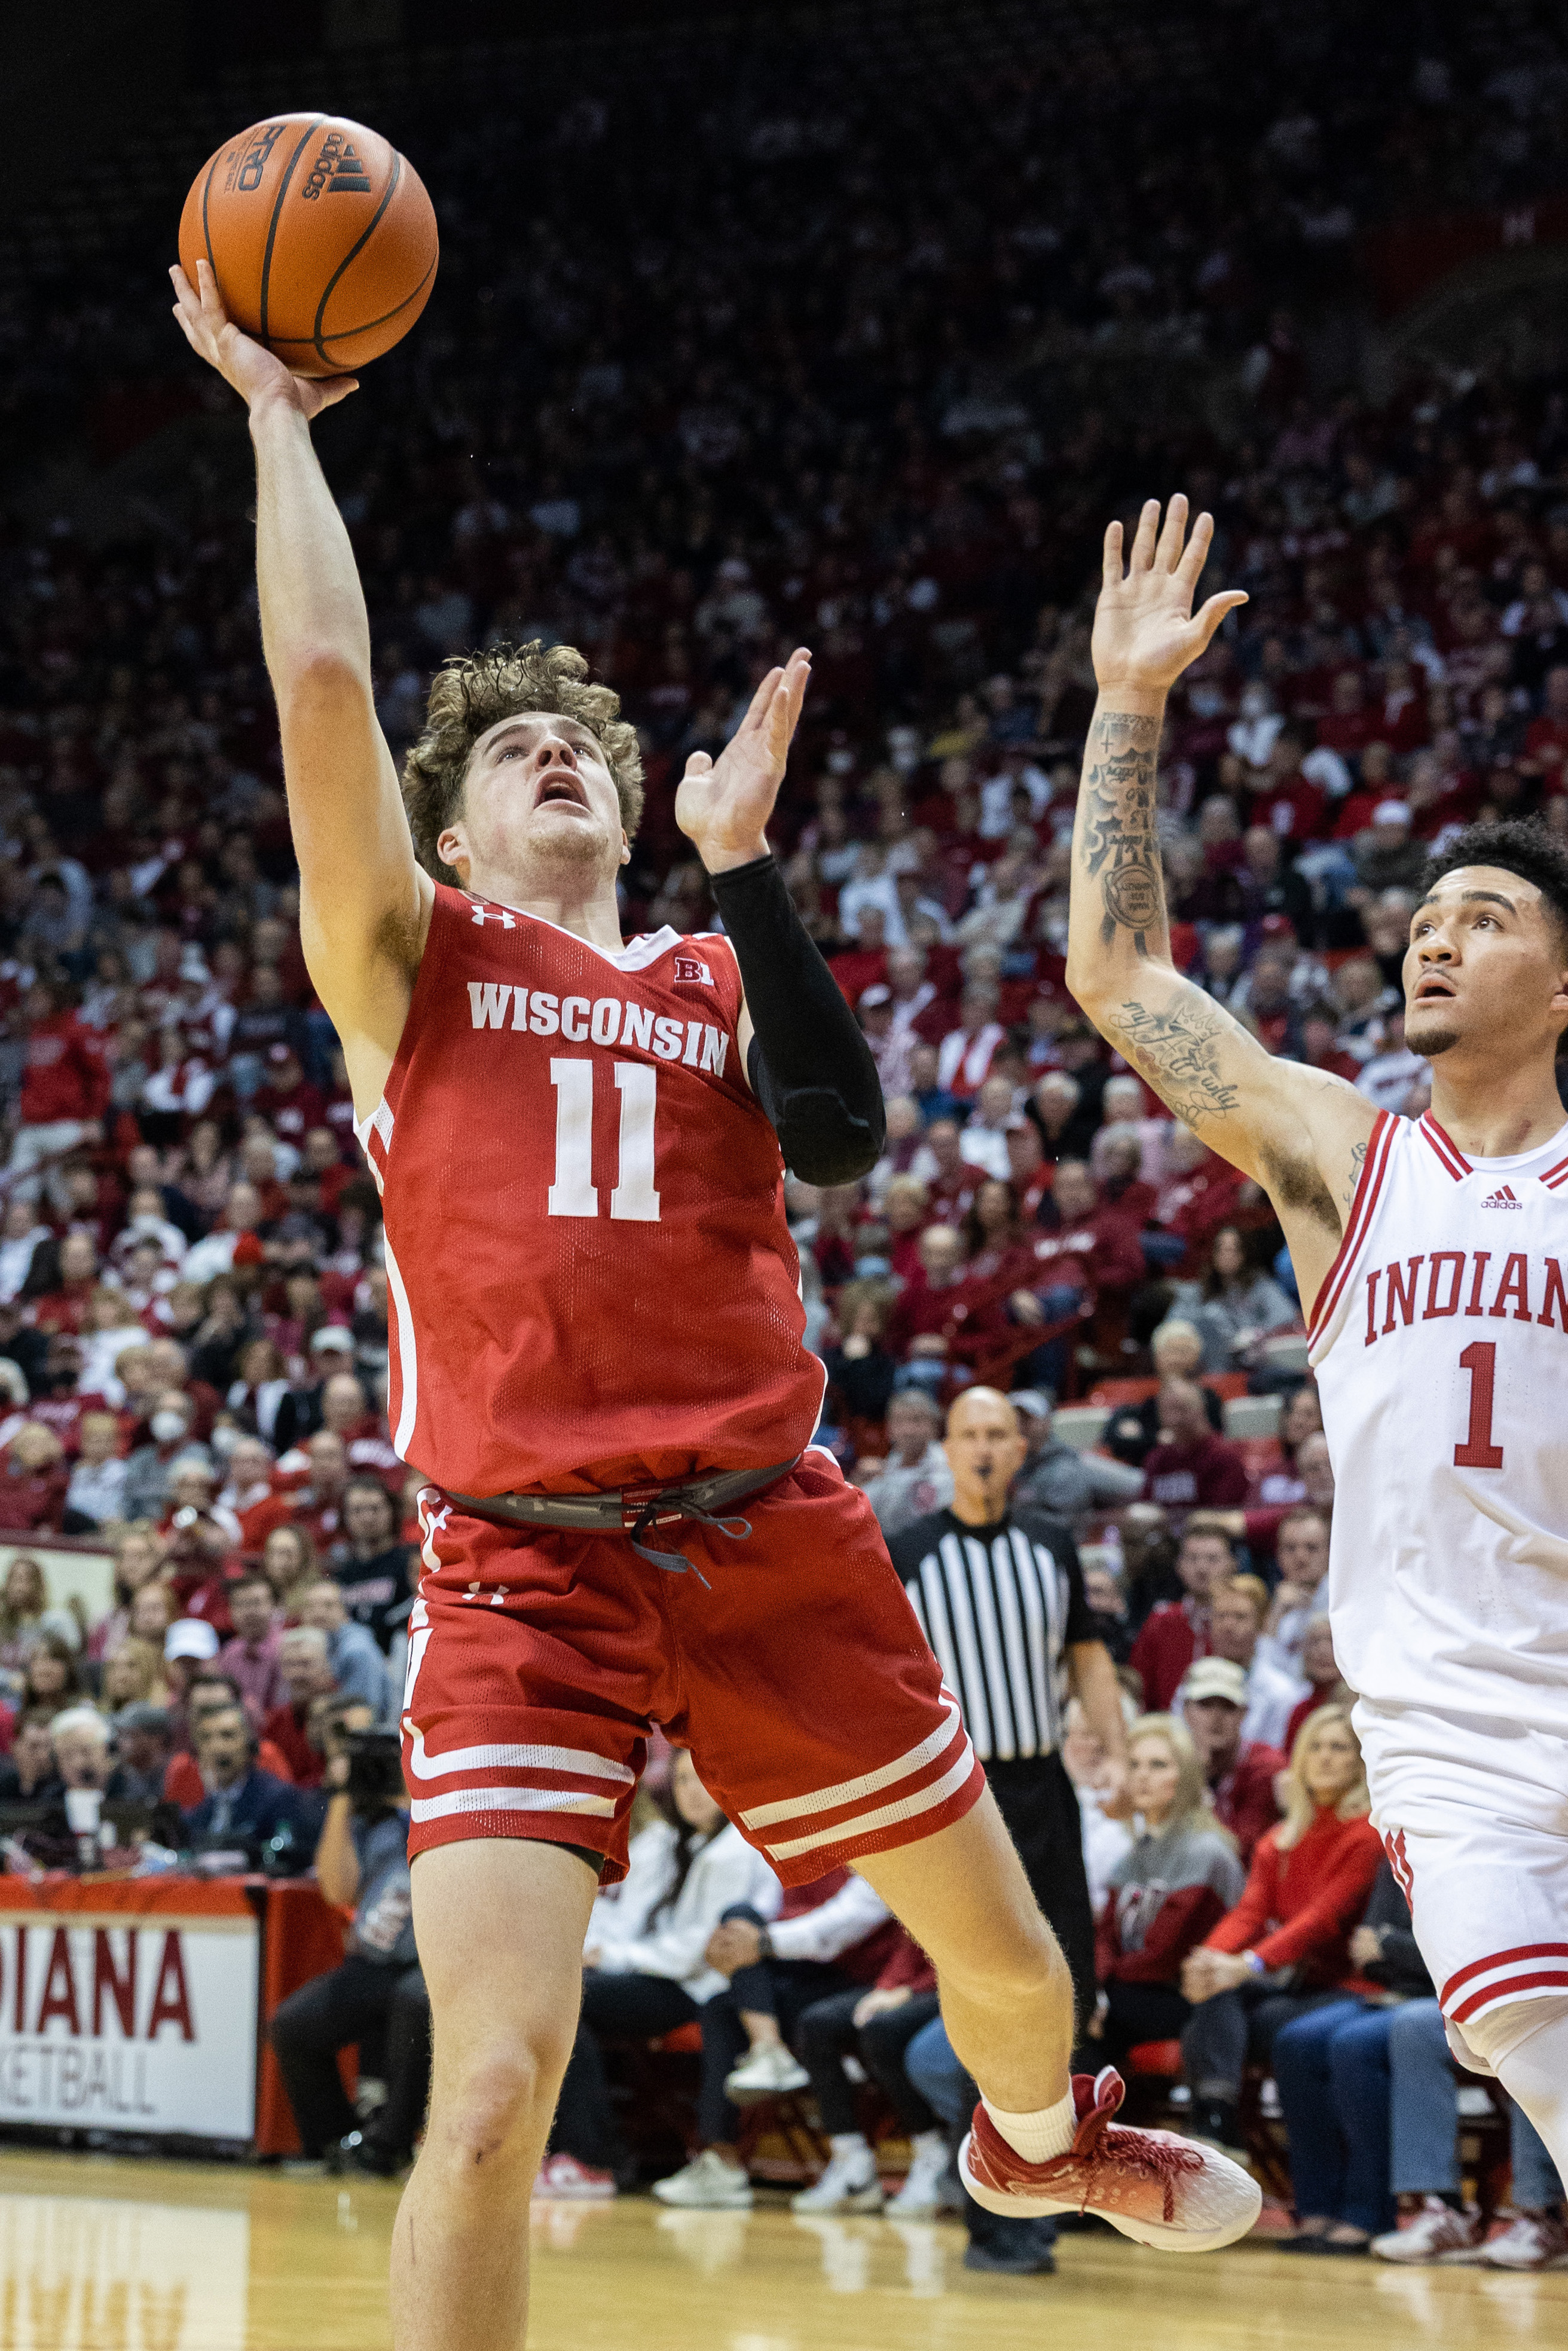 Wisconsin Badgers guard Max Klesmit shoots the ball against Indiana Hoosiers guard Jalen Hood-Schifino in the second half at Simon Skjodt Assembly Hall.